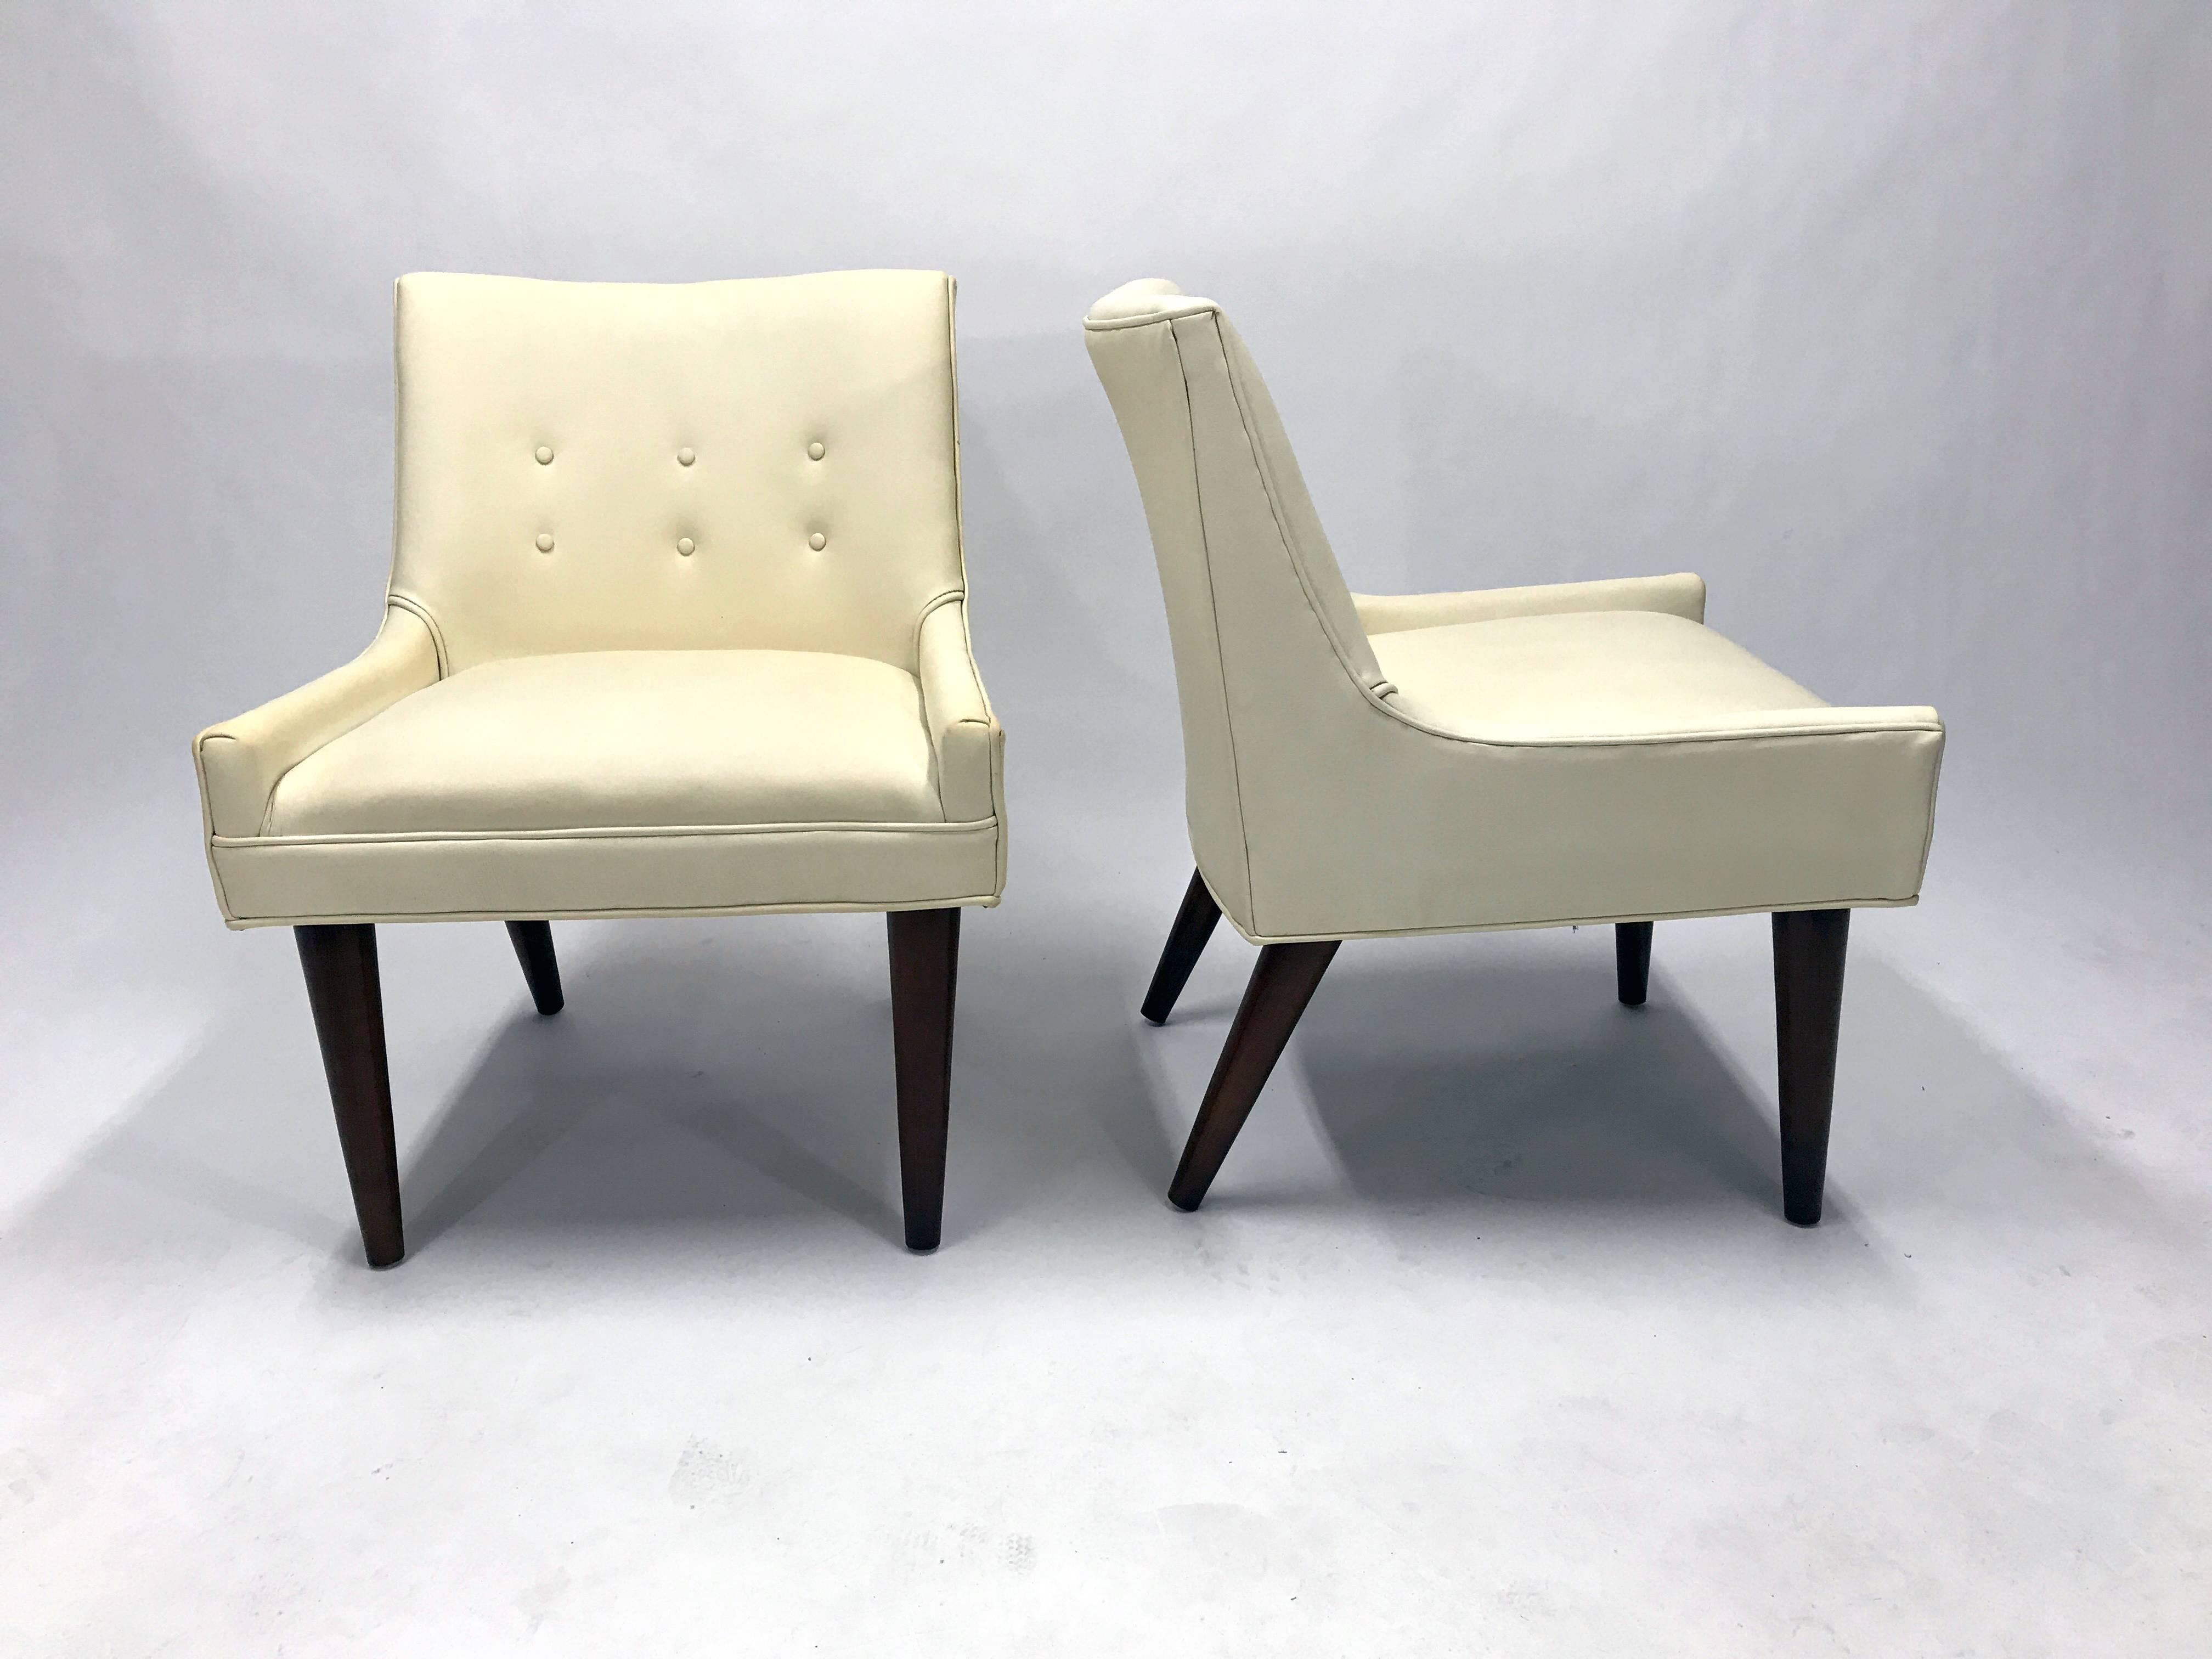 A pair of Mid-Century slipper chairs in the manner of Milo Baughman, a la his Model 176 chair produced by Thayer Coggin in the late 1950s.

In original ivory vinyl upholstery with walnut legs.

These chairs are located in Denver, Colorado.